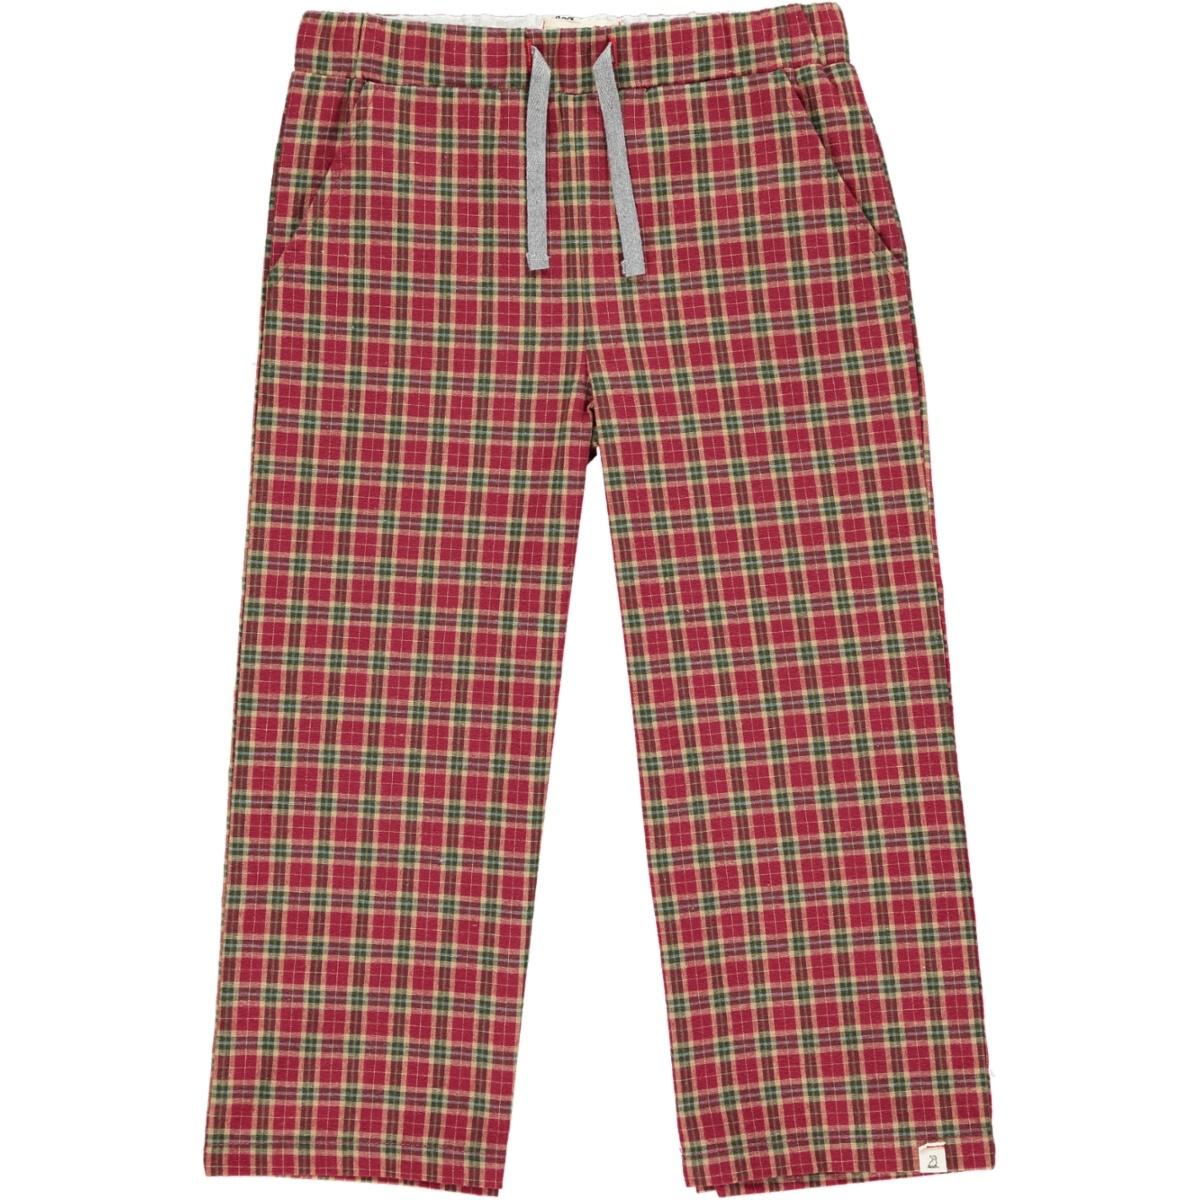 Rockford Lounge Pant- Red